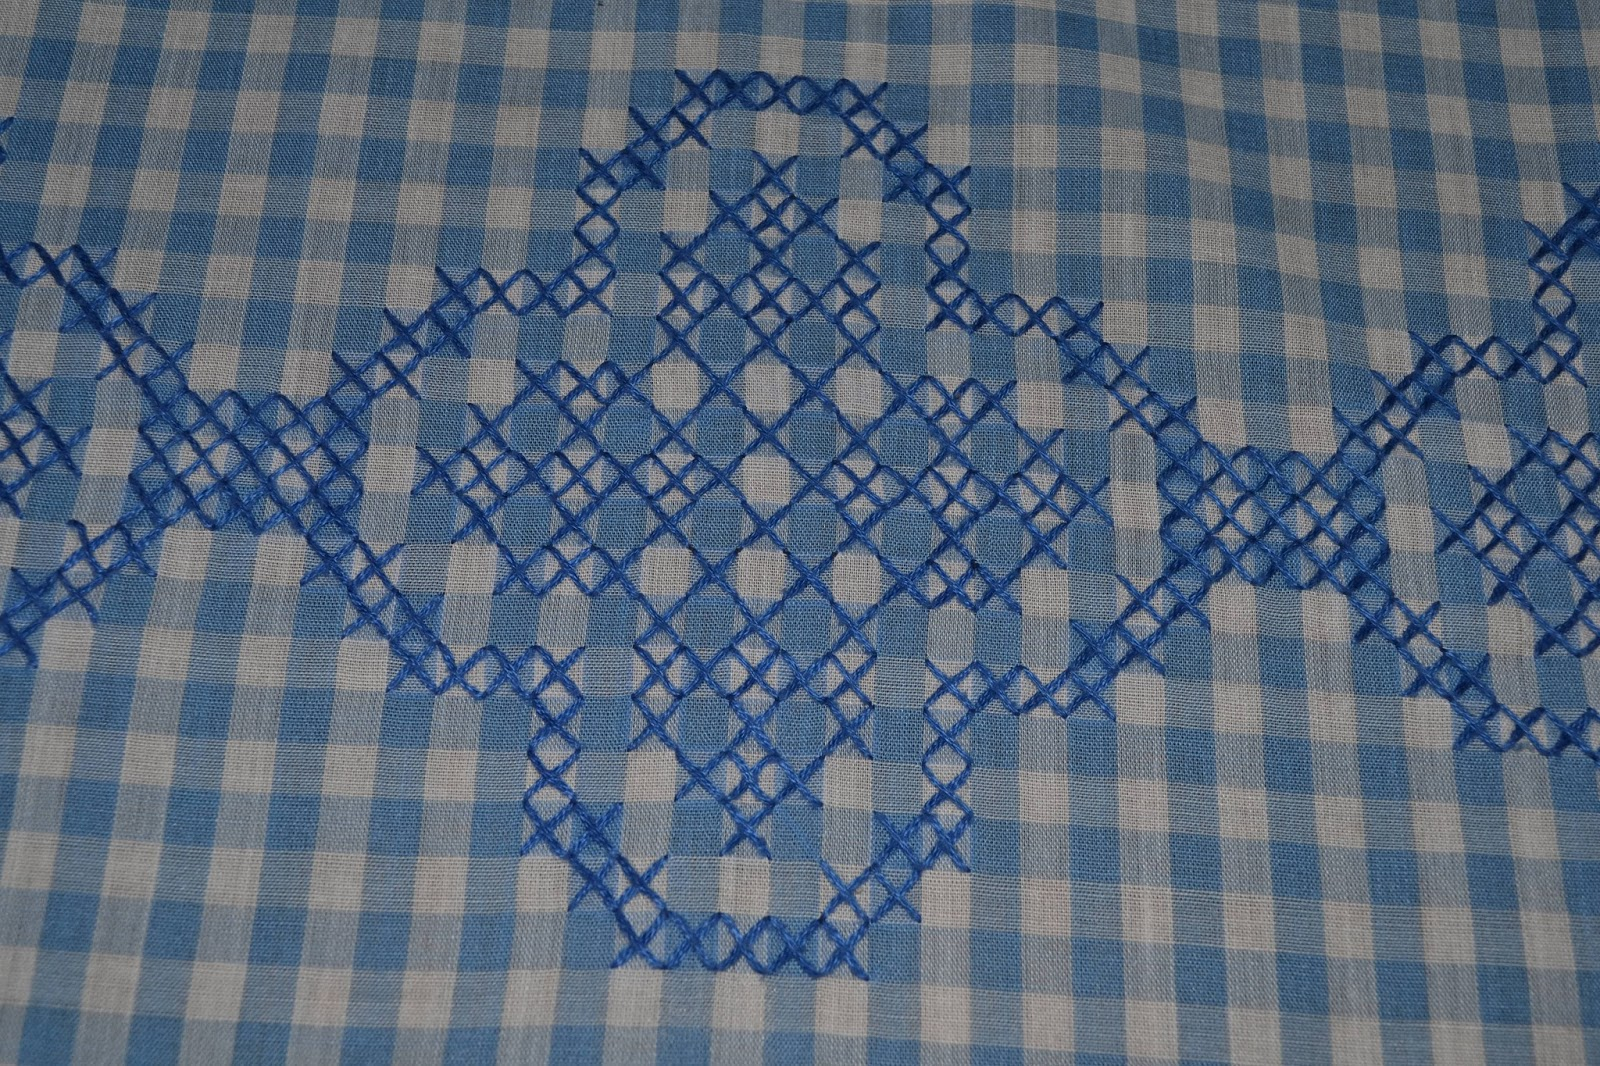 Chicken Scratch Embroidery Patterns Magpie Quilts Blue And White